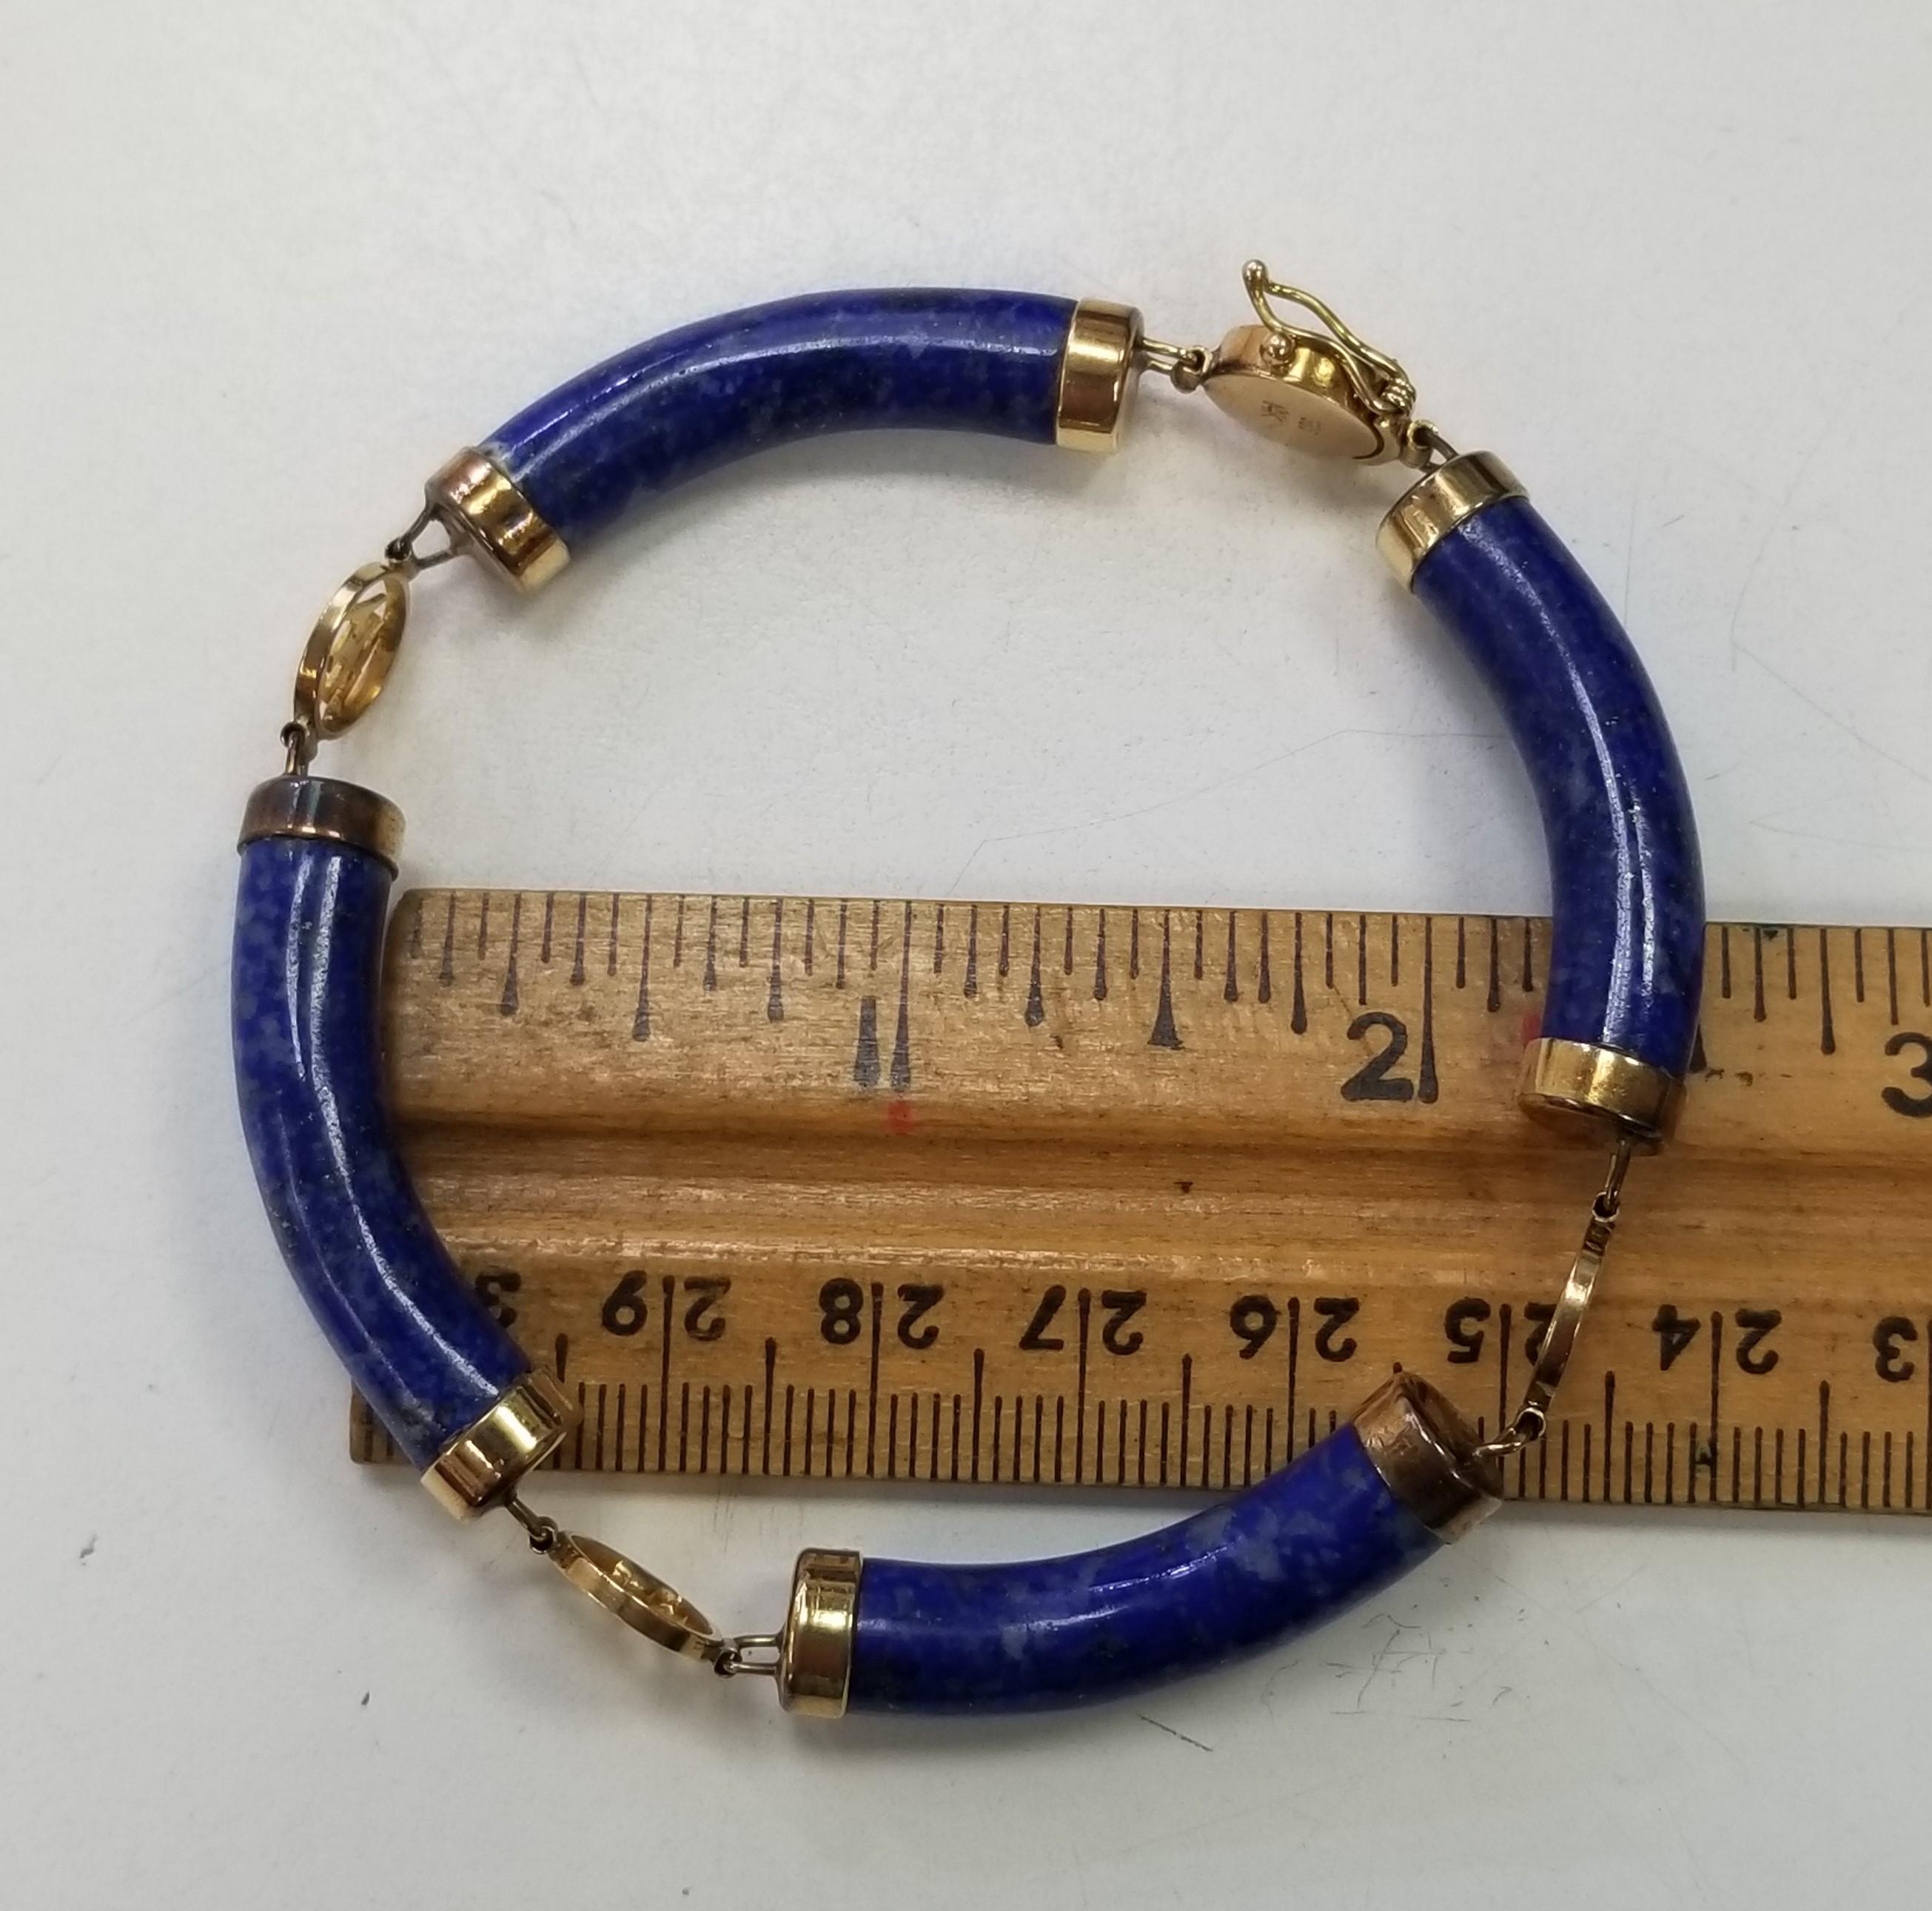 It is said that Lapis Lazuli has been treasured for centuries for its deep blue color and its association with spirituality and wisdom. This gemstone is believed to have metaphysical properties that can uplift the soul and expand